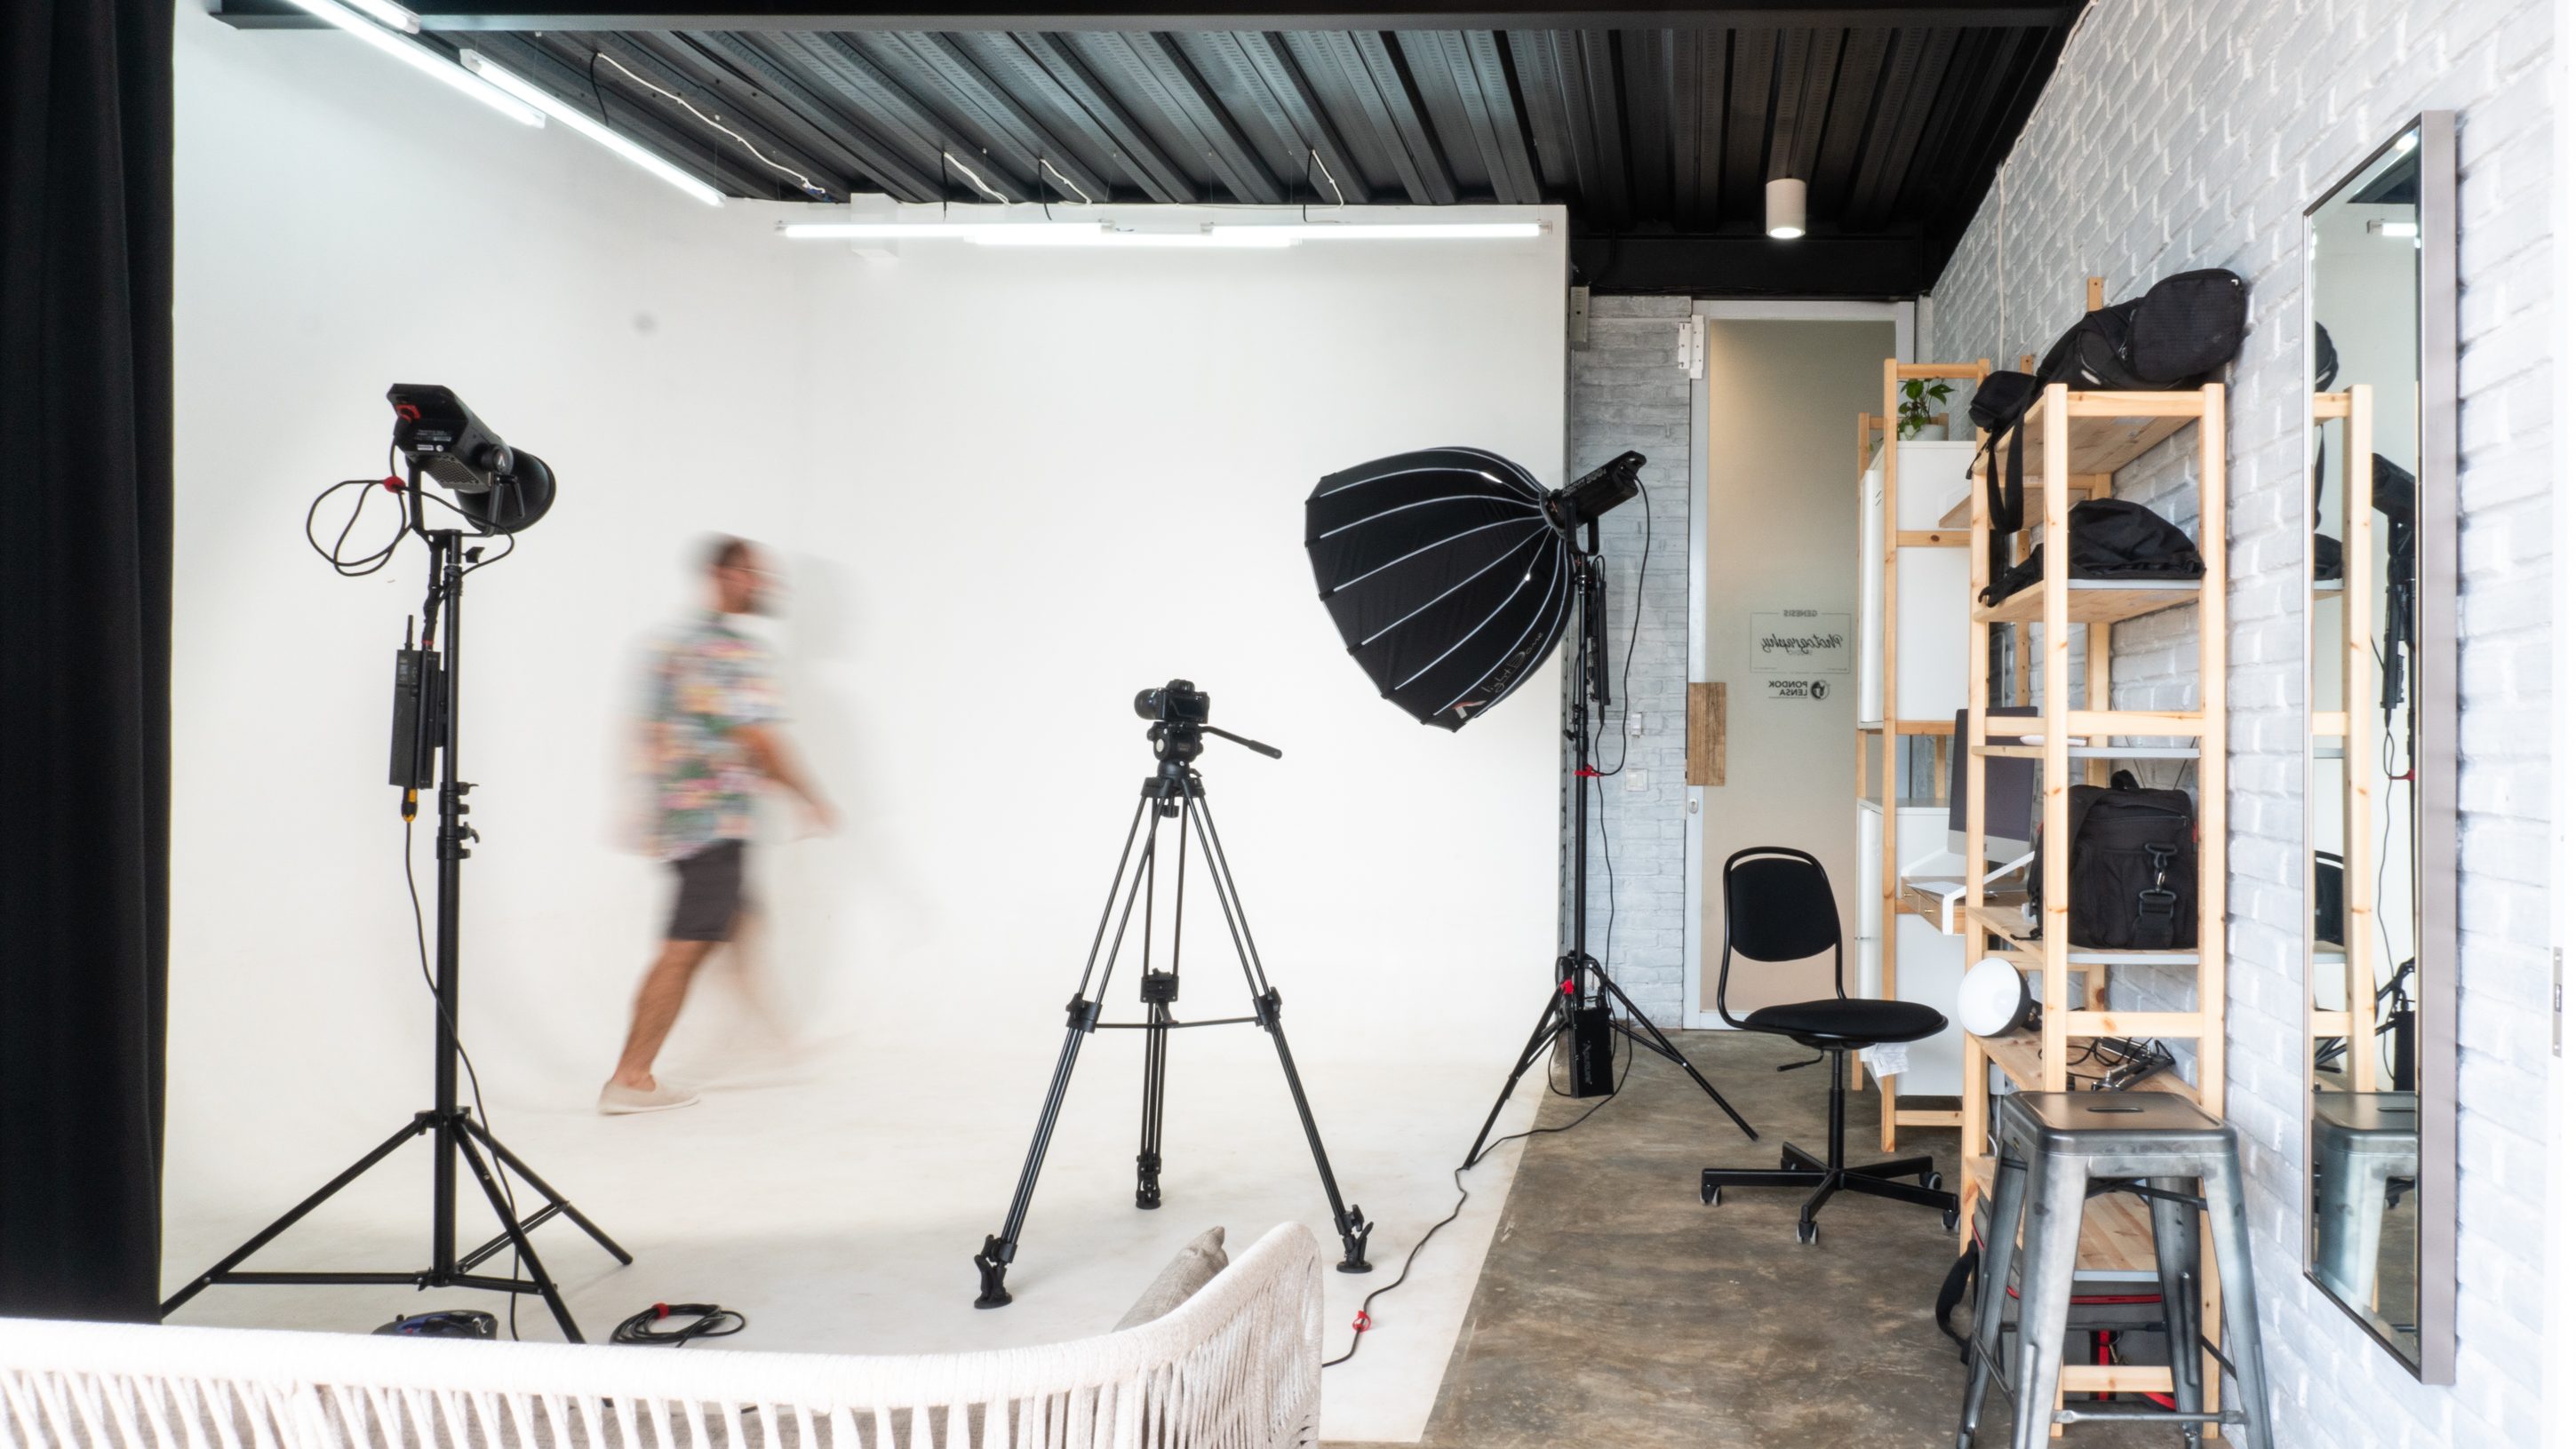 Pondok Lensa photography equipment is included in the hourly rental of Genesis photography studio. Photo: GCC